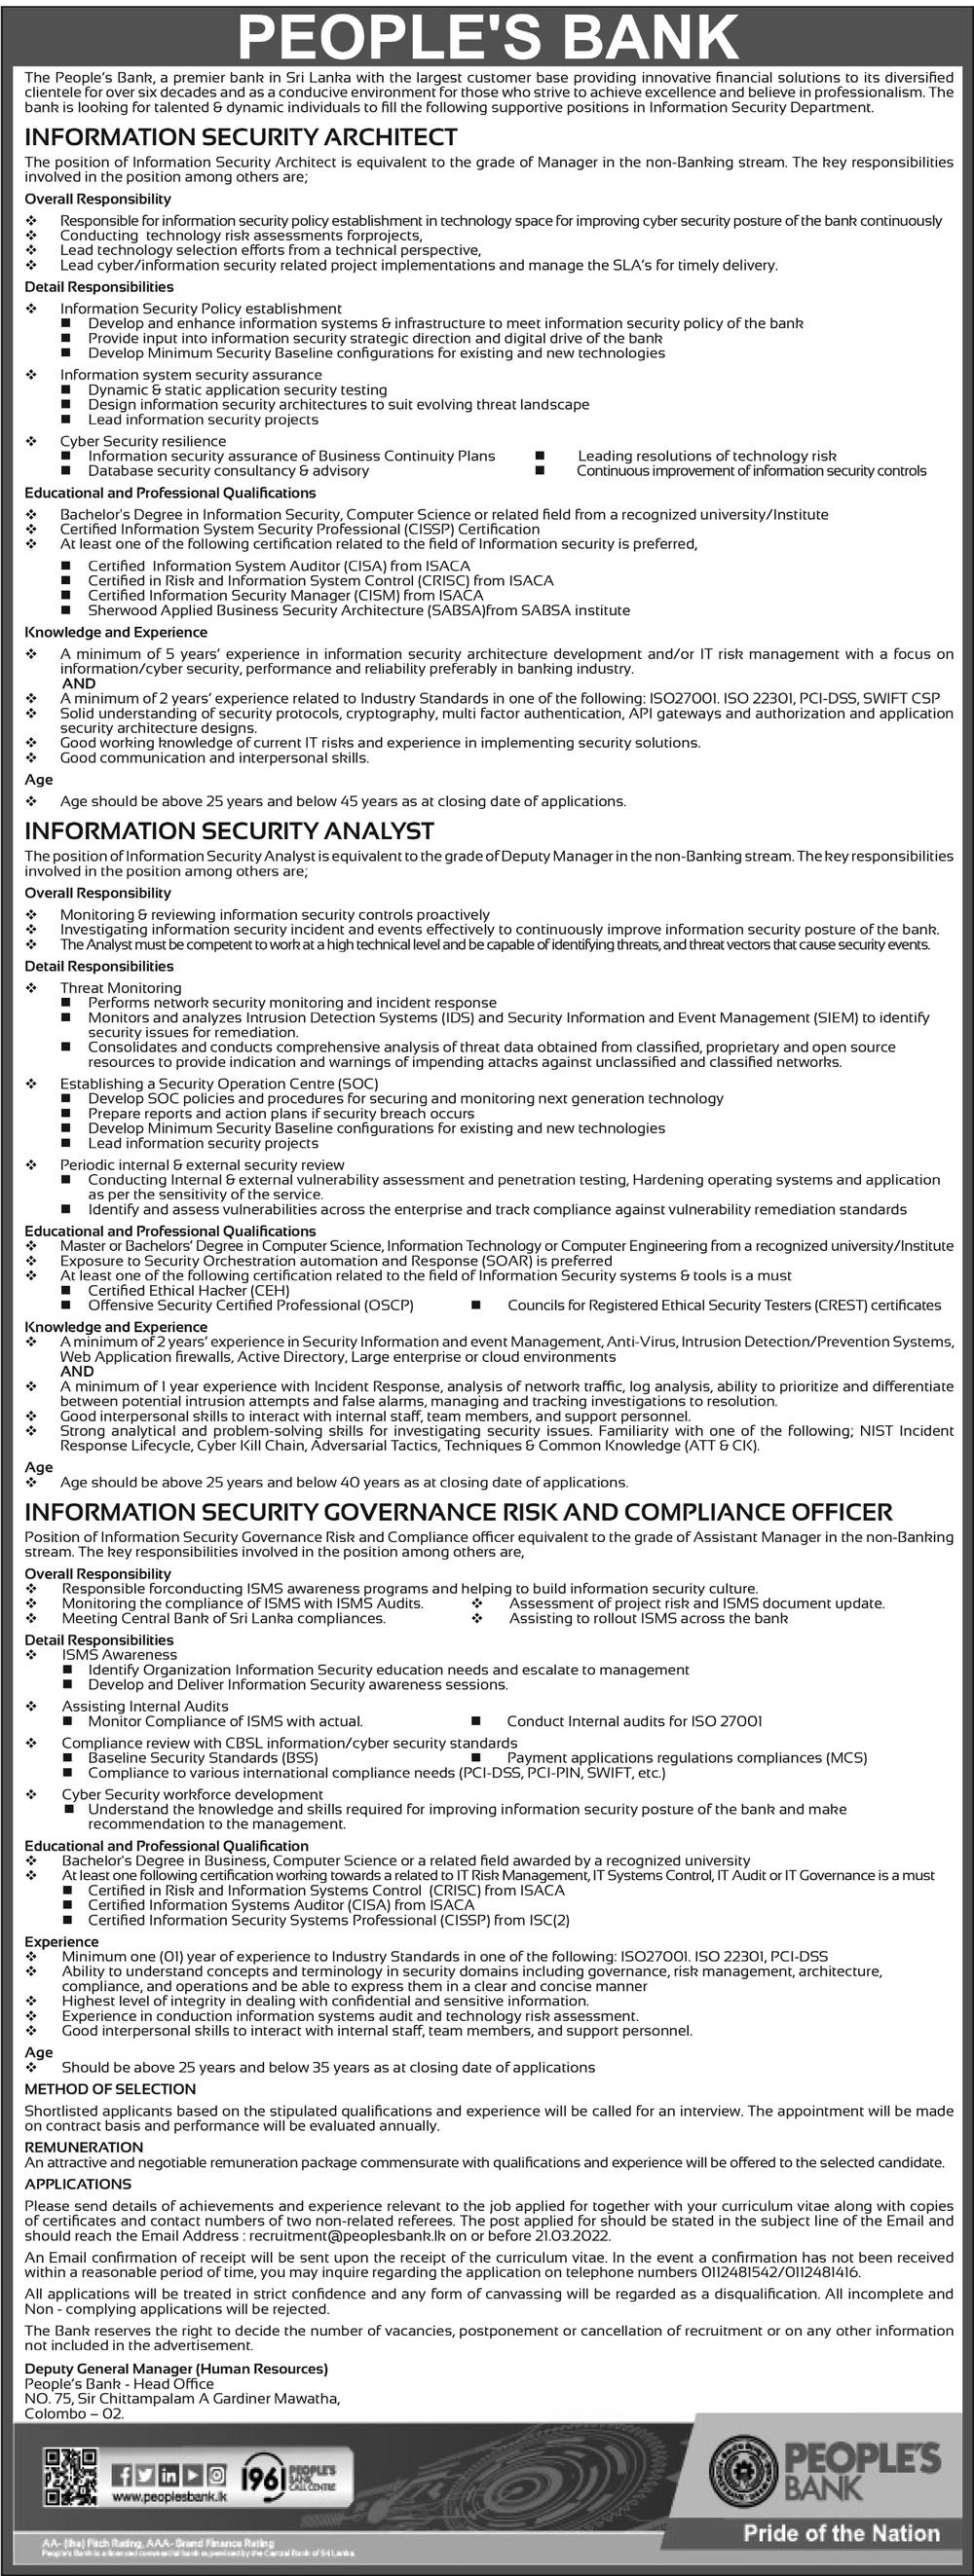 Information Security Architect / Information Security Analyst / Information Security Governance Risk & Compliance Officer - People’s Bank